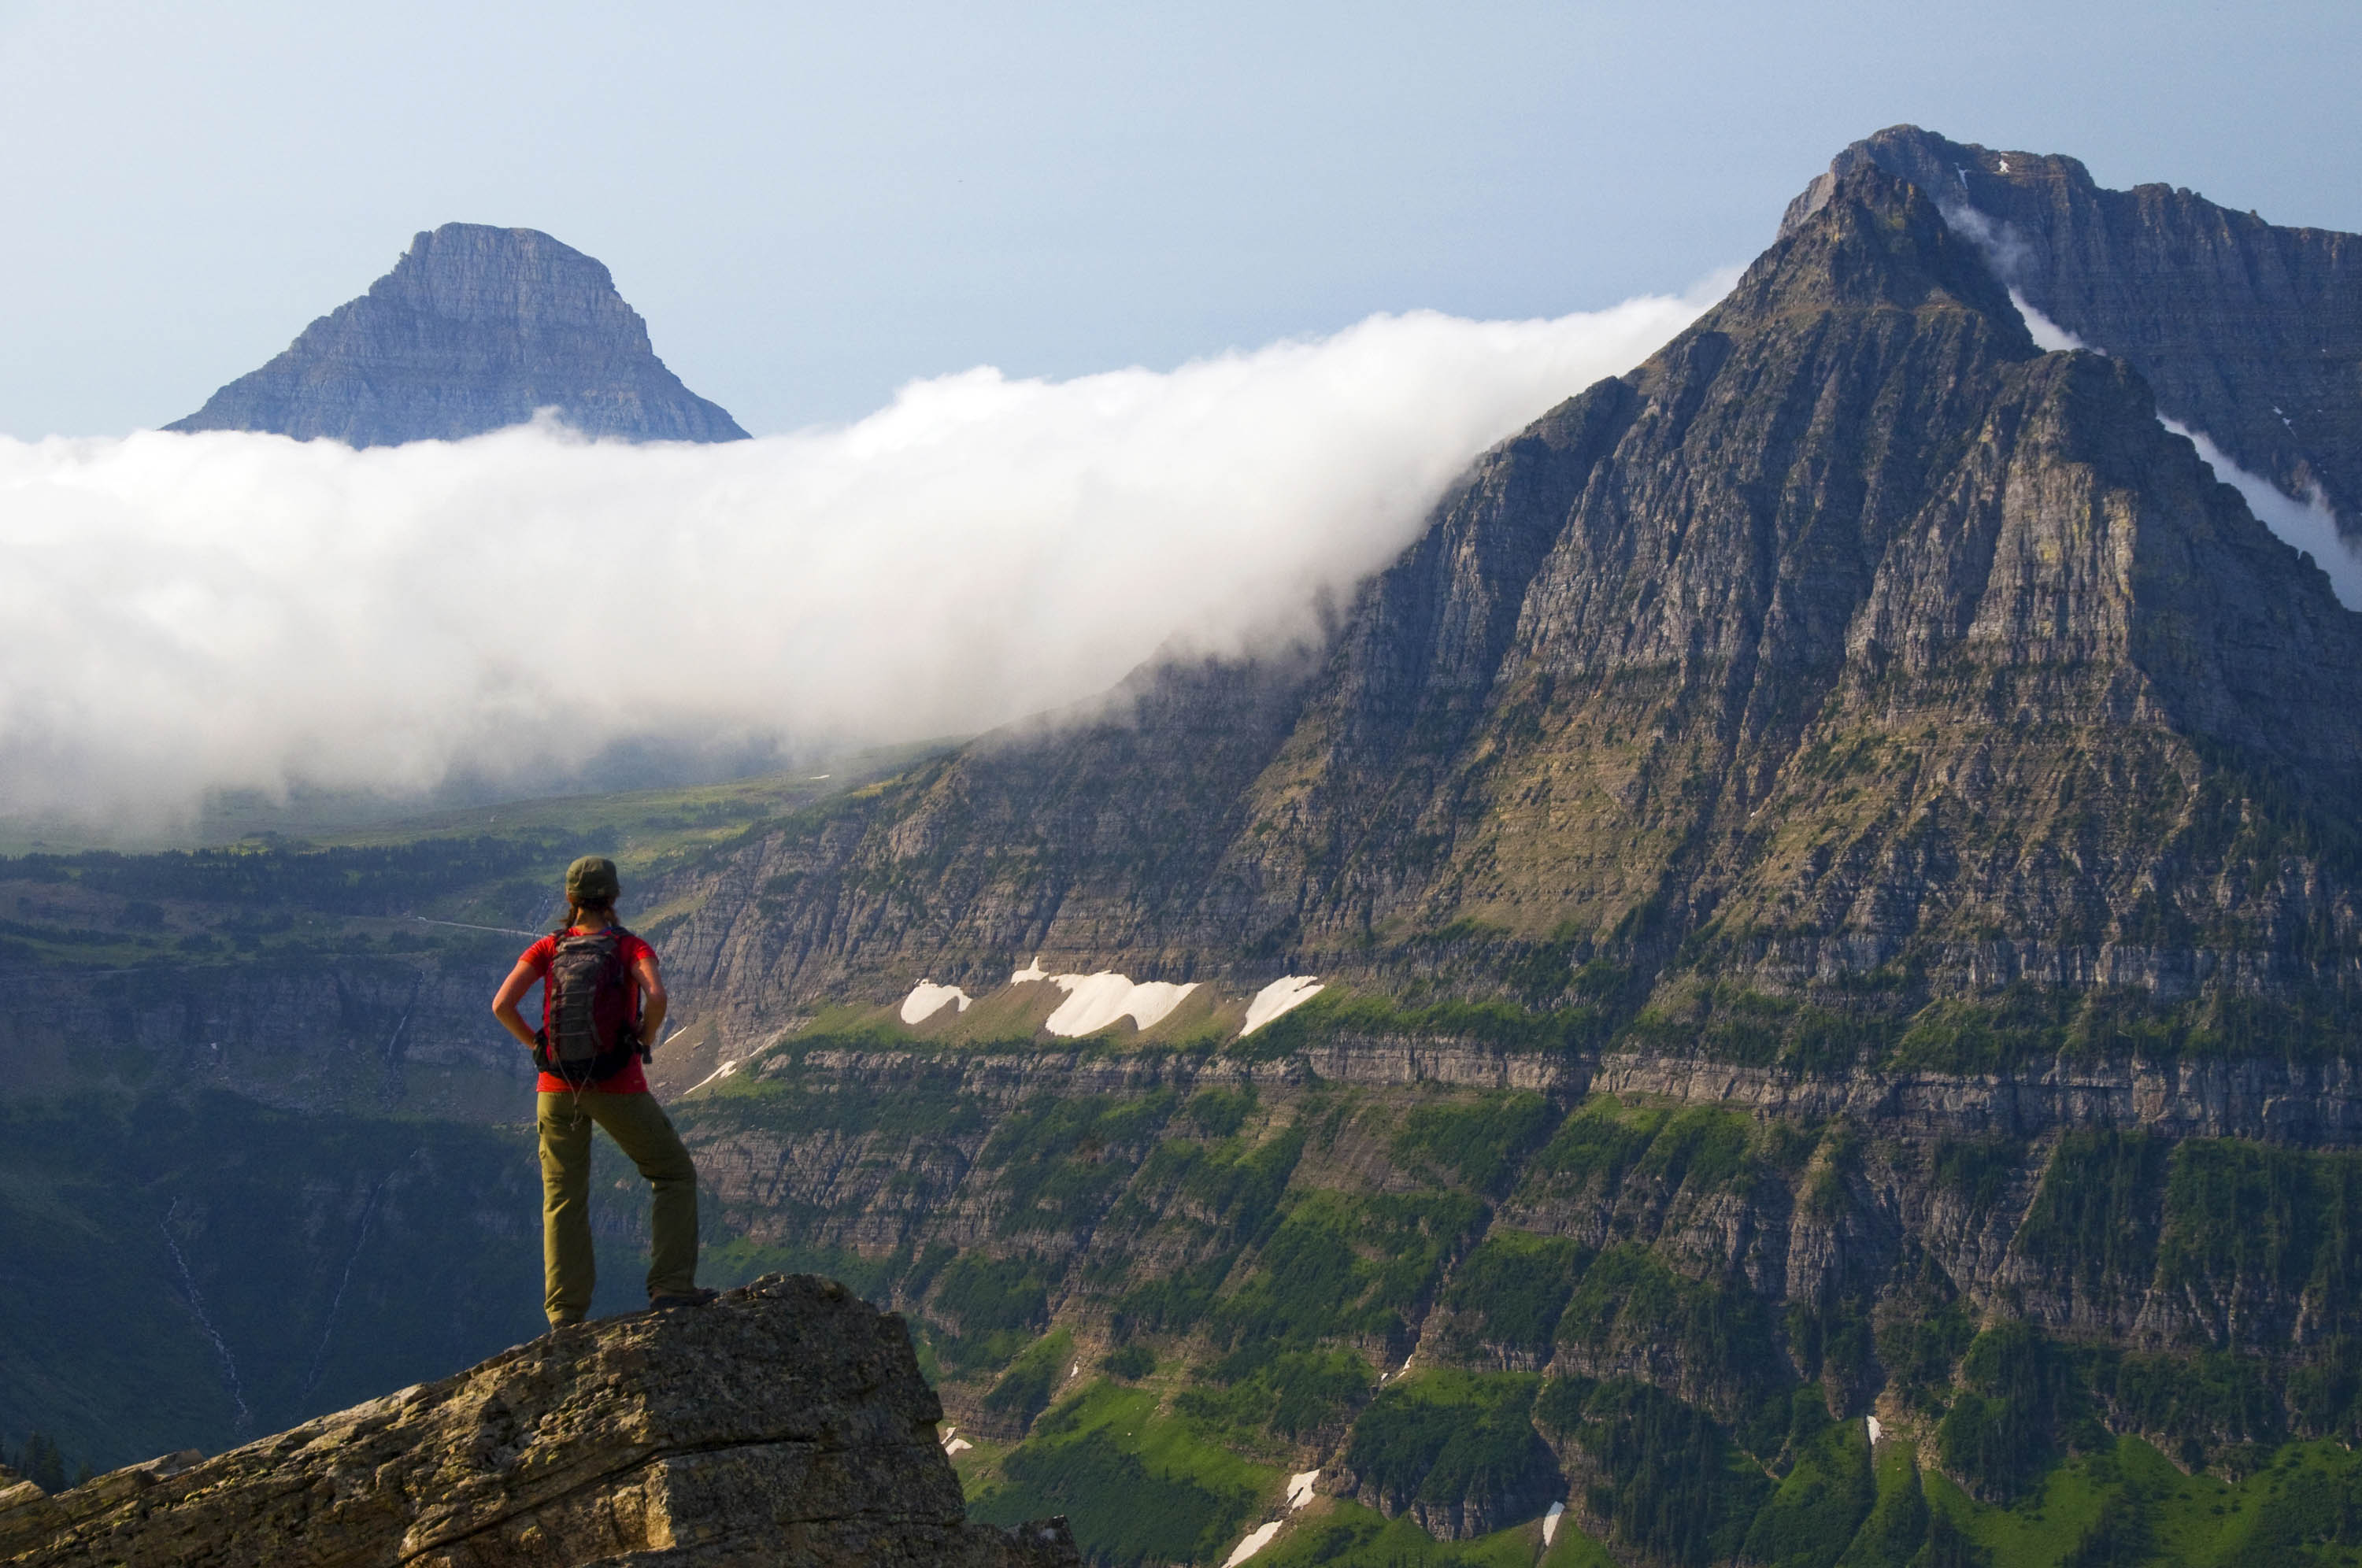 Taking in the view on the Highline Trail  in Glacier National Park, Montana.